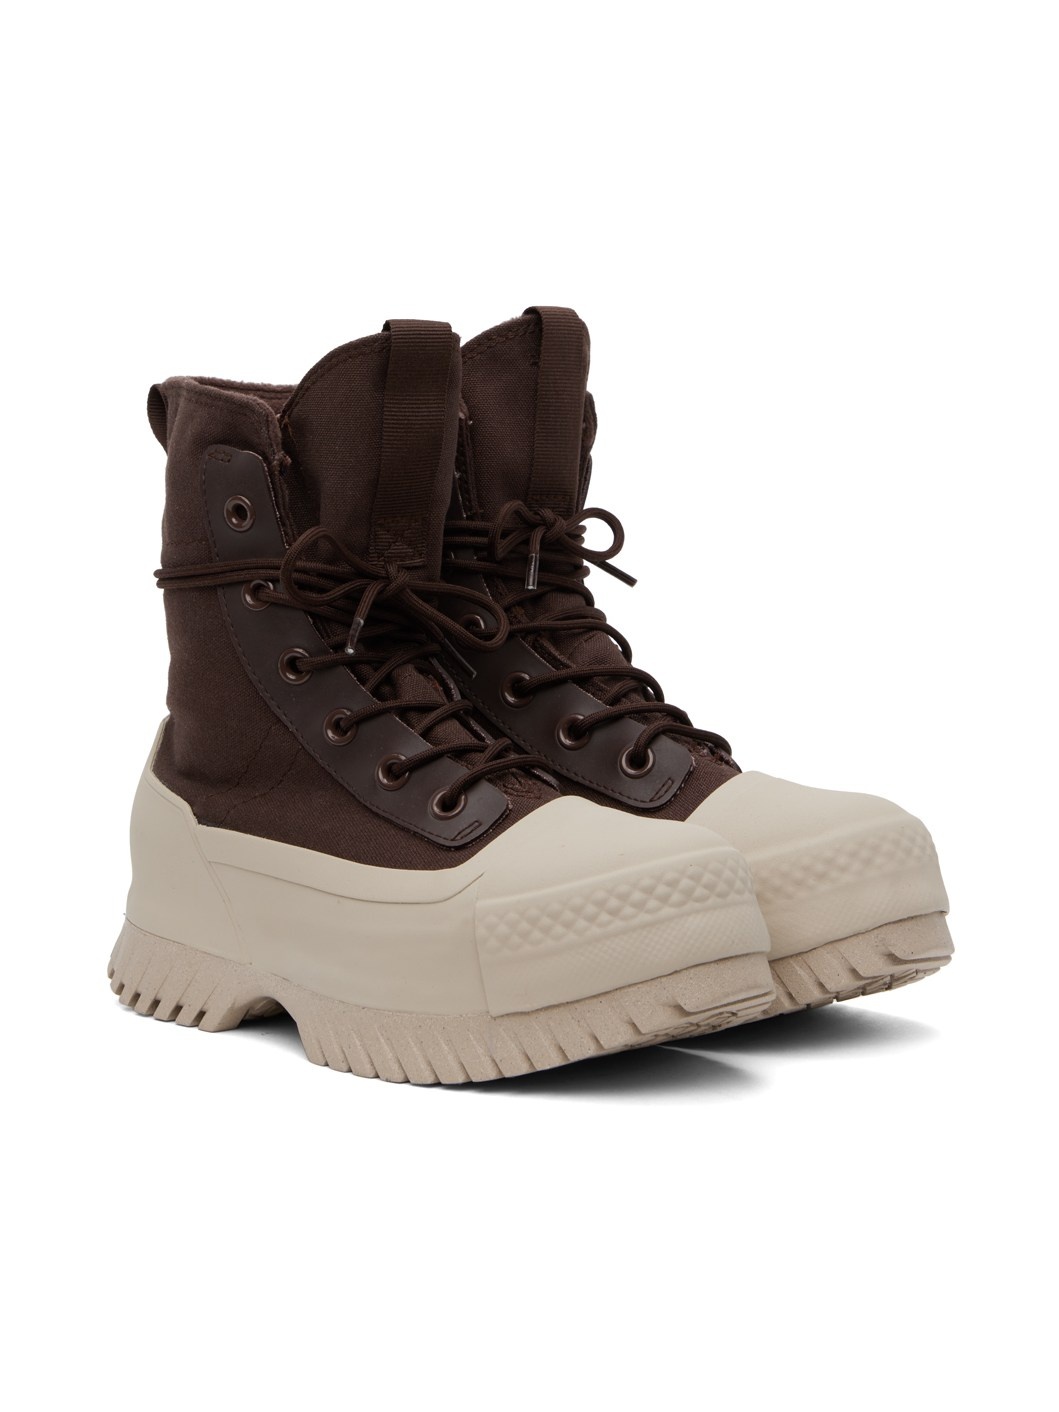 Brown Chuck Taylor All Star Lugged 2.0 Counter Climate Boots - 4